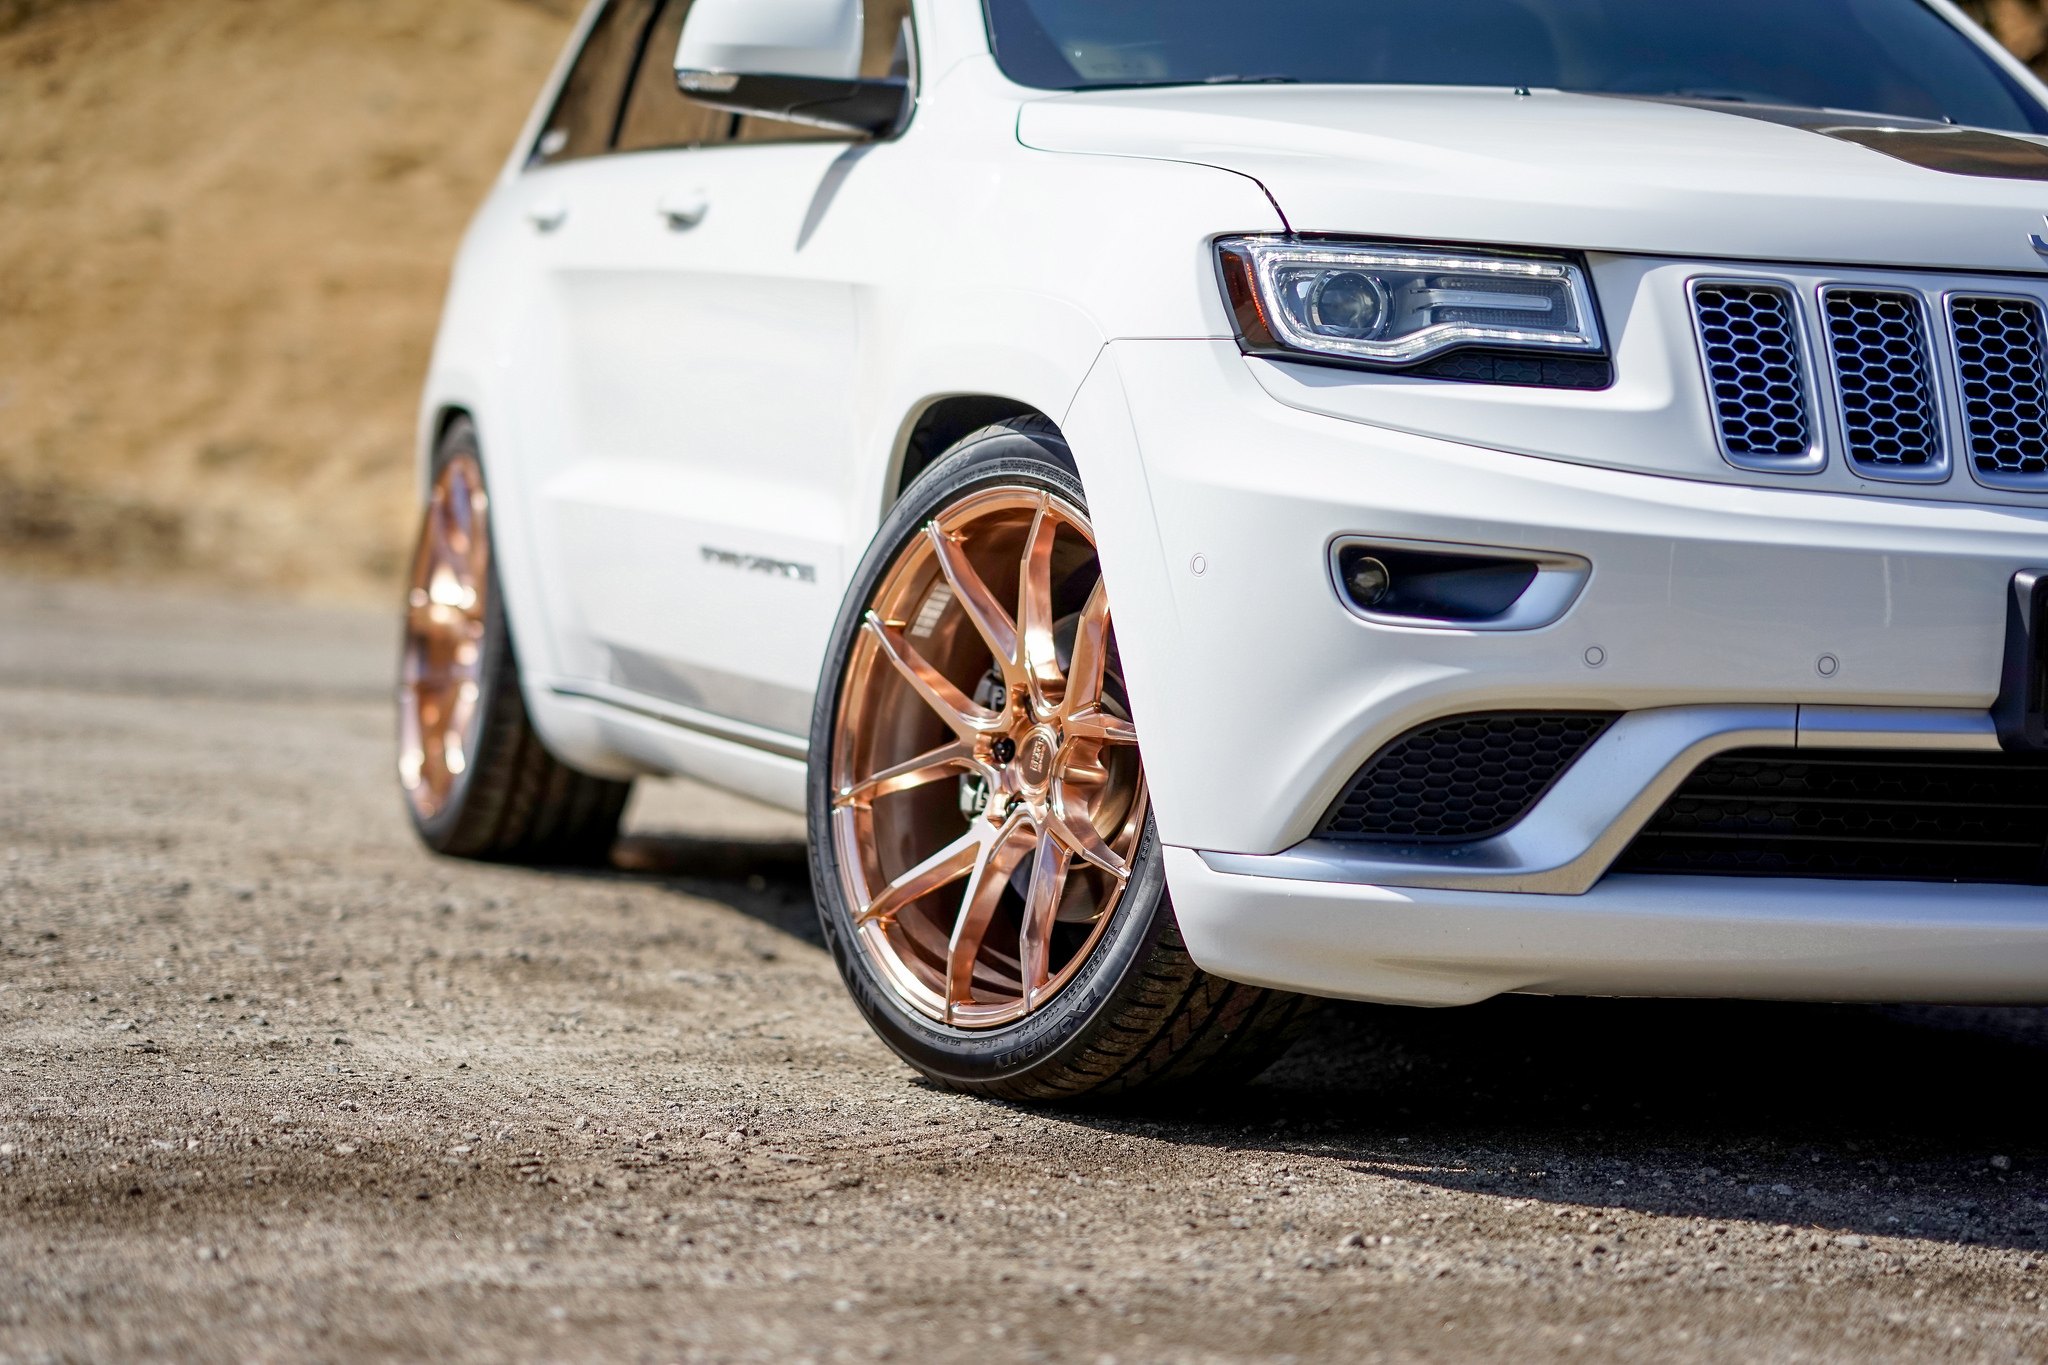 Aftermarket Side Skirts on White Jeep Grand Cherokee - Photo by VIBE Motorsports